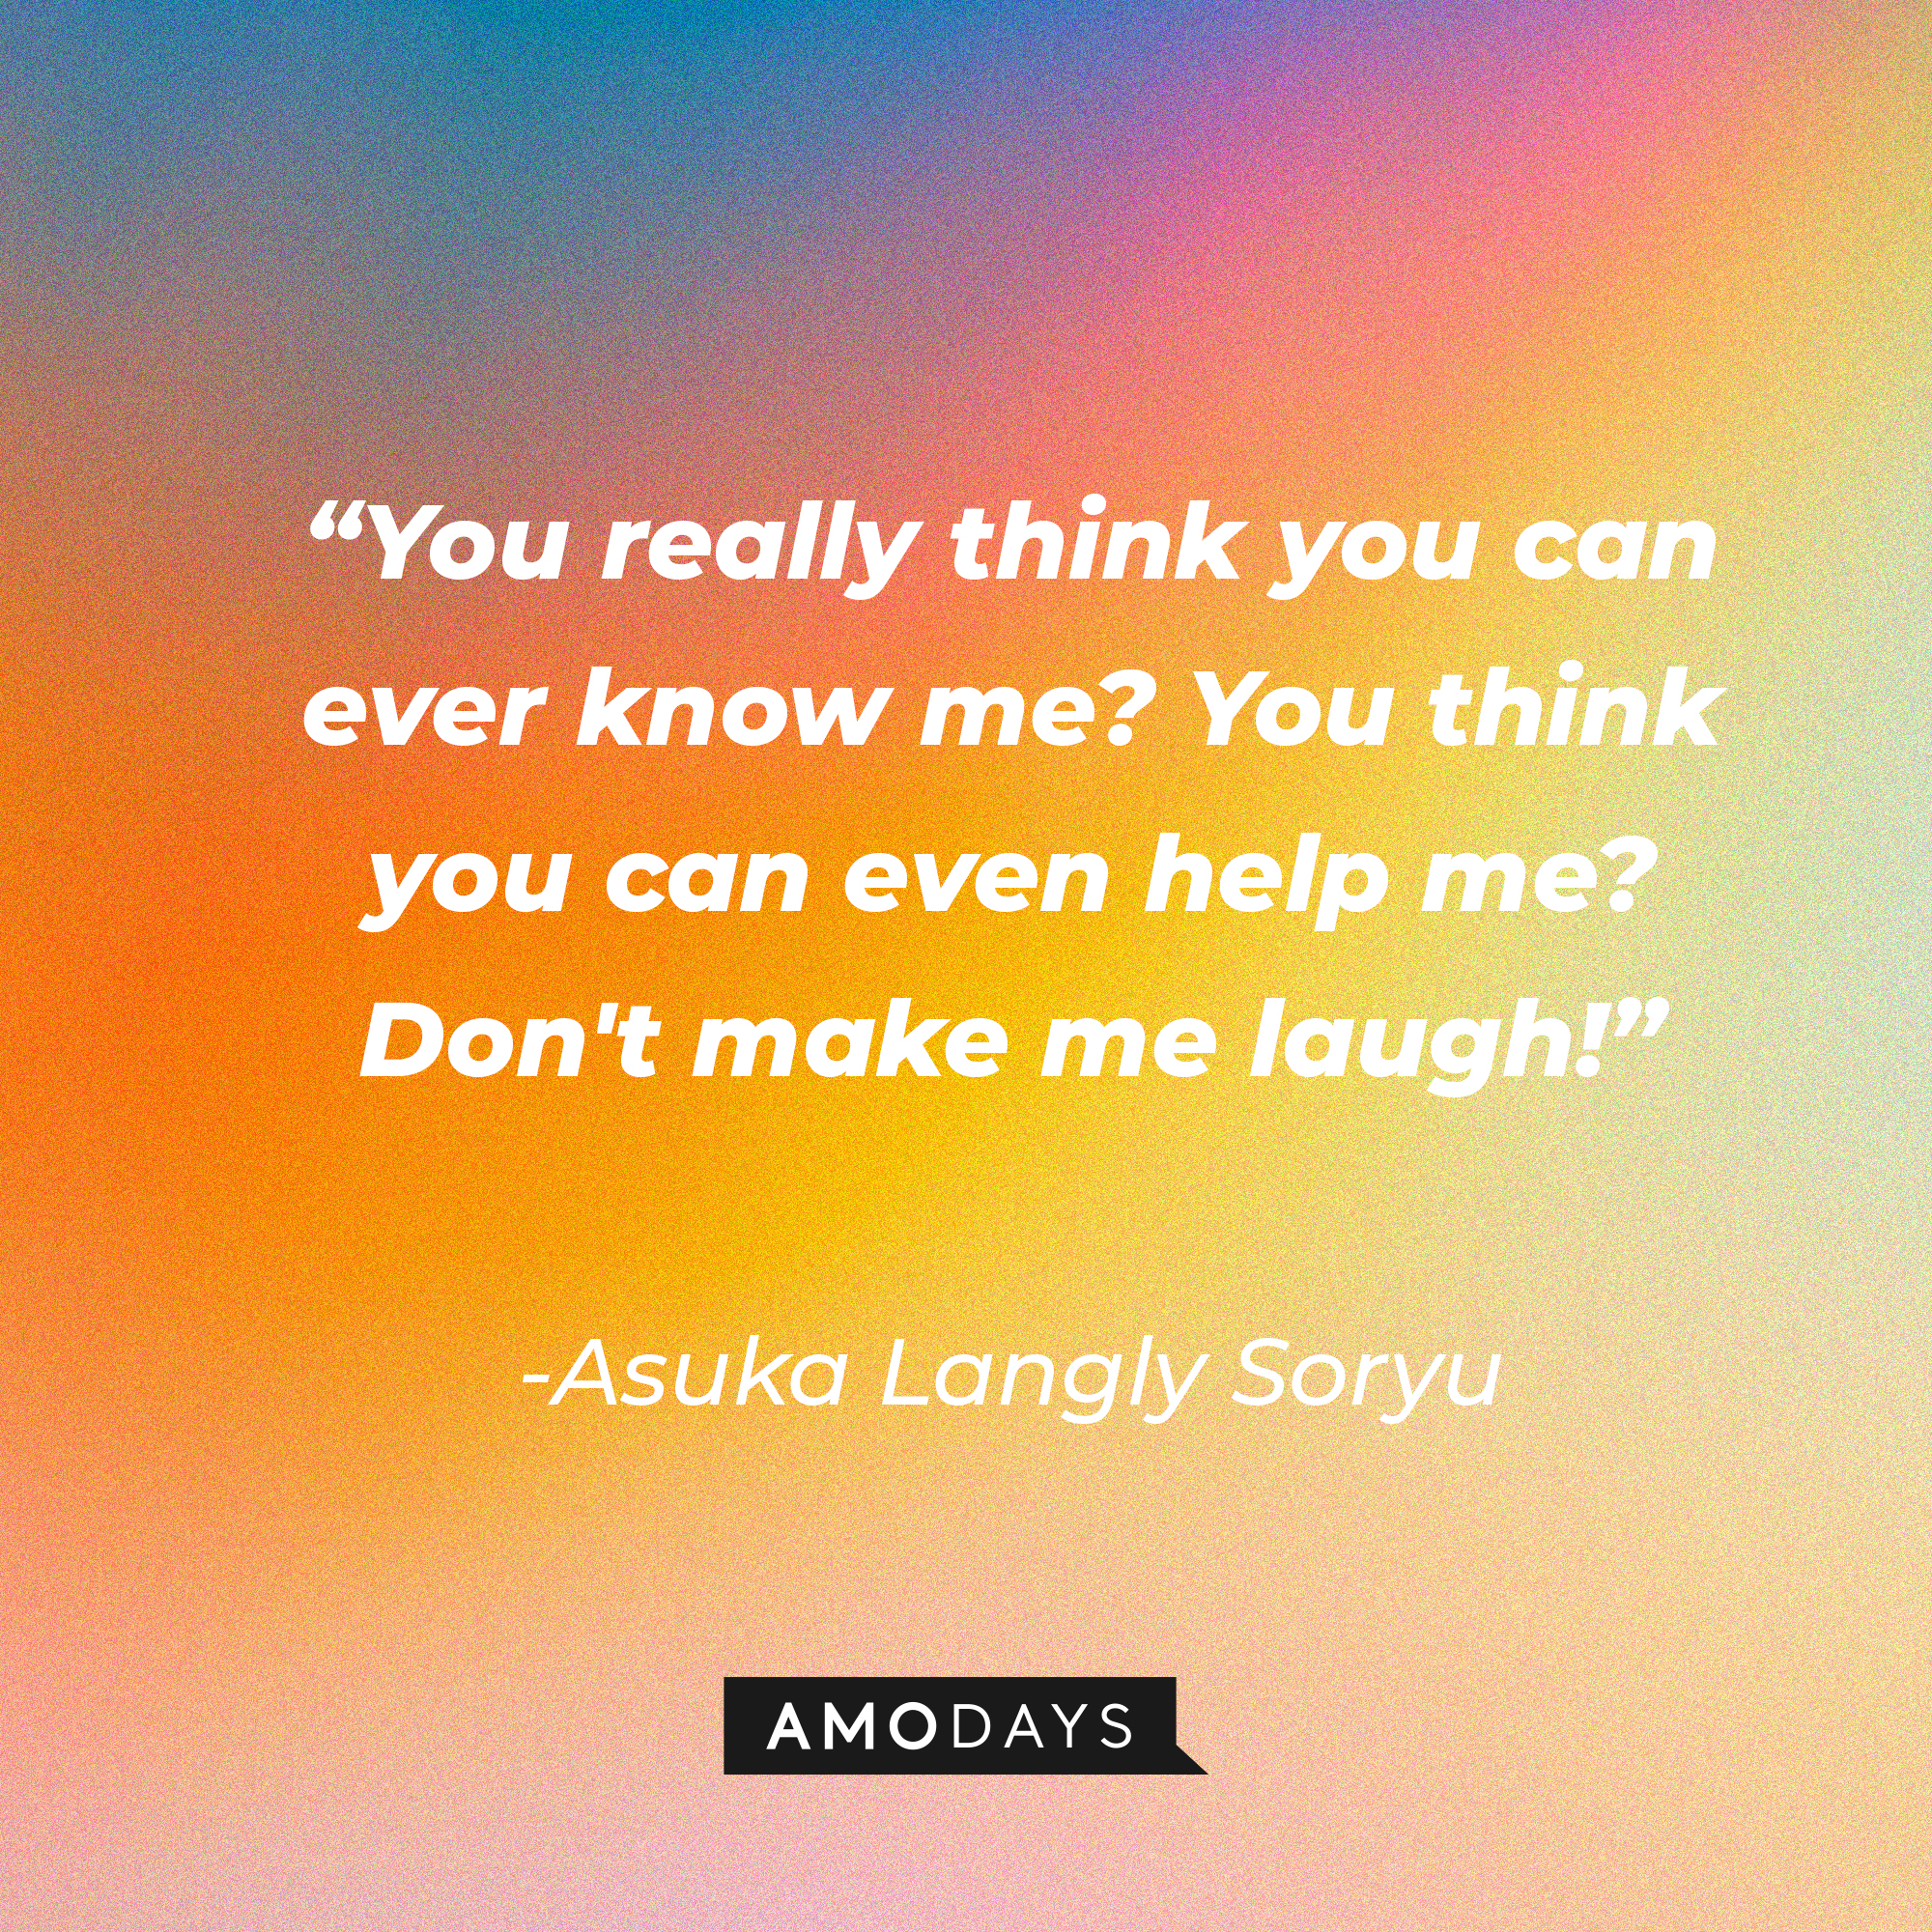 Asuka Langly Soryu’s quote: “You really think you can ever know me? You think you can even help me? Don't make me laugh!” | Source: Amo